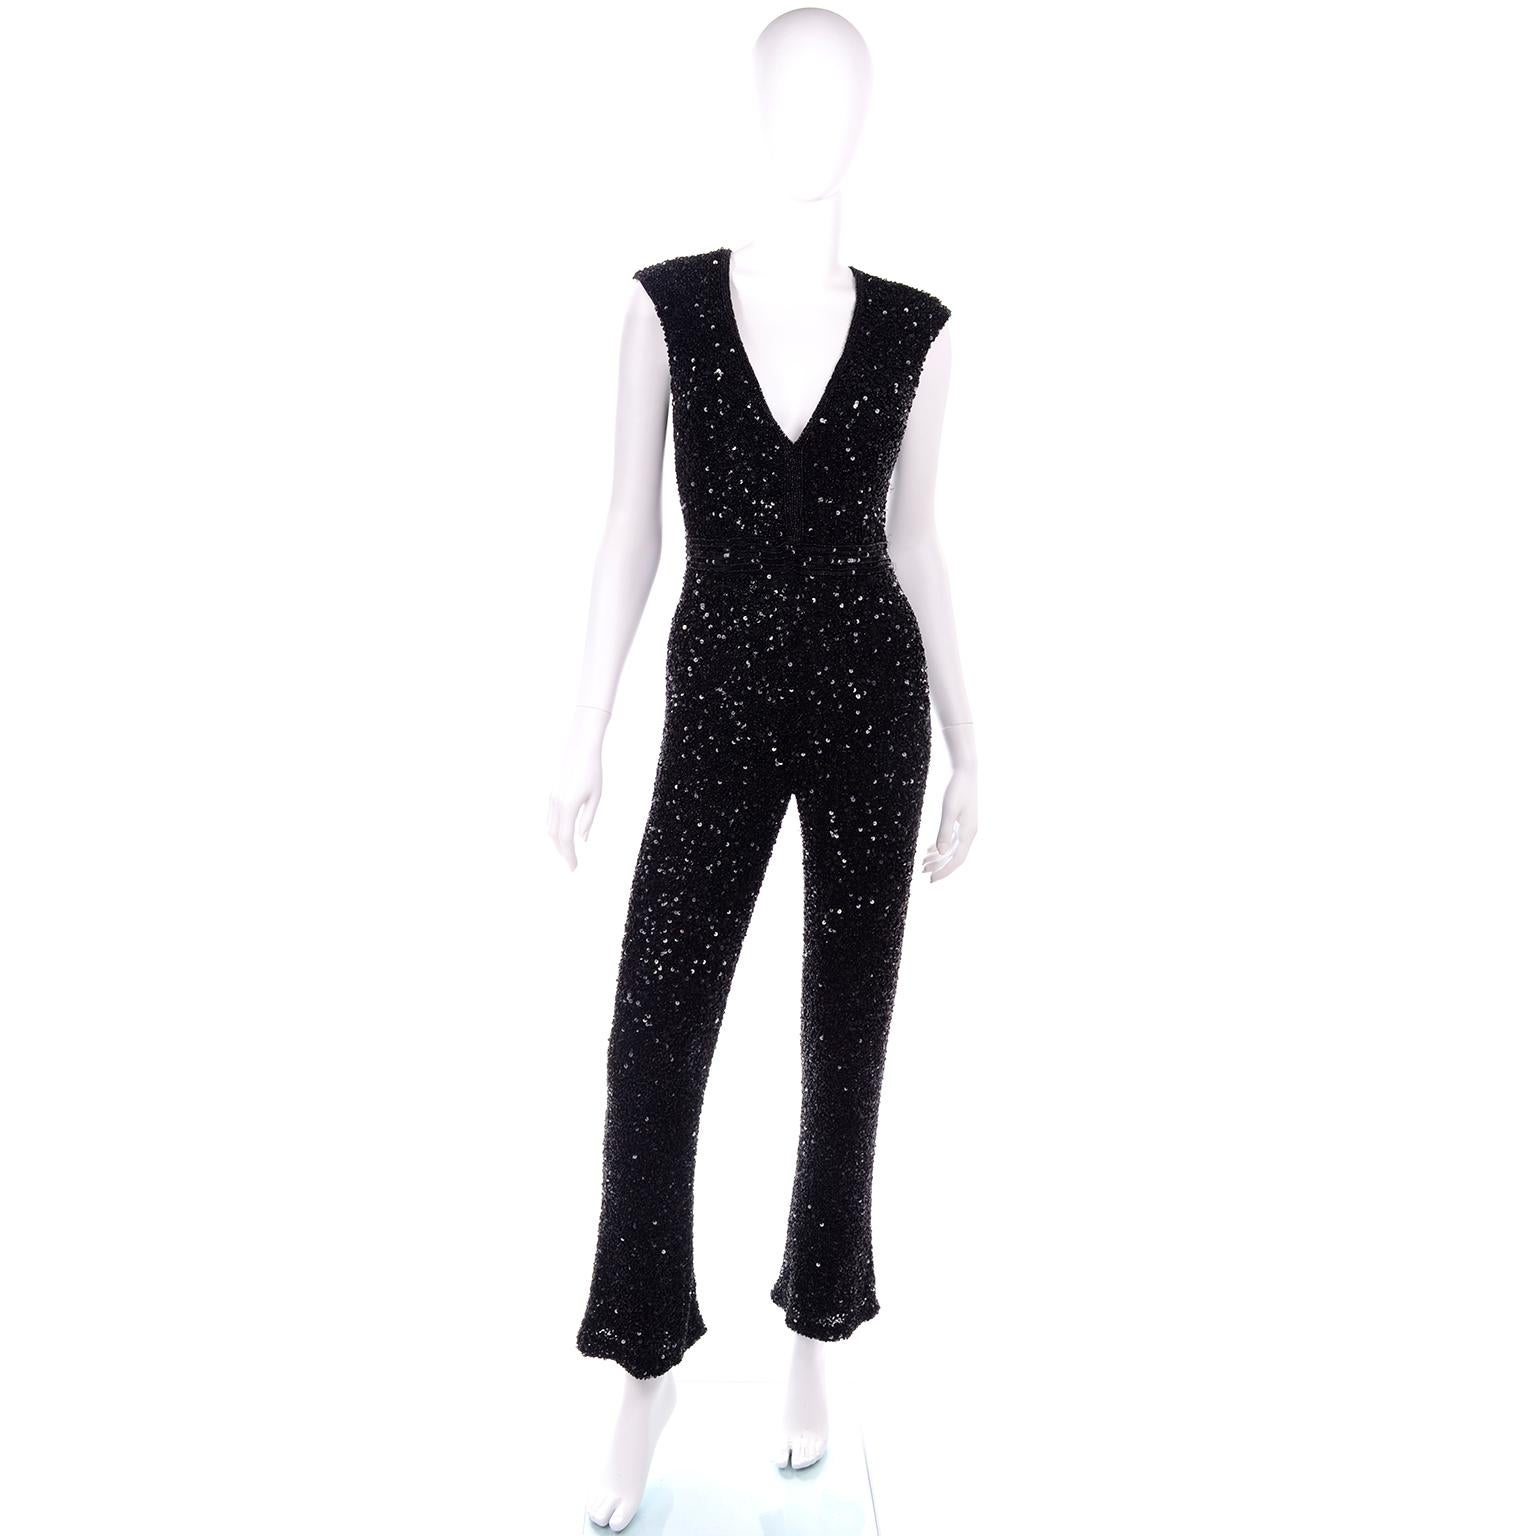 This vintage sleeveless black evening jumpsuit is literally sparkling with intricately hand sewn beads and sequins! This would be a great evening dress alternative for any holiday party or special evening event. This deep V neck jumpsuit is fully